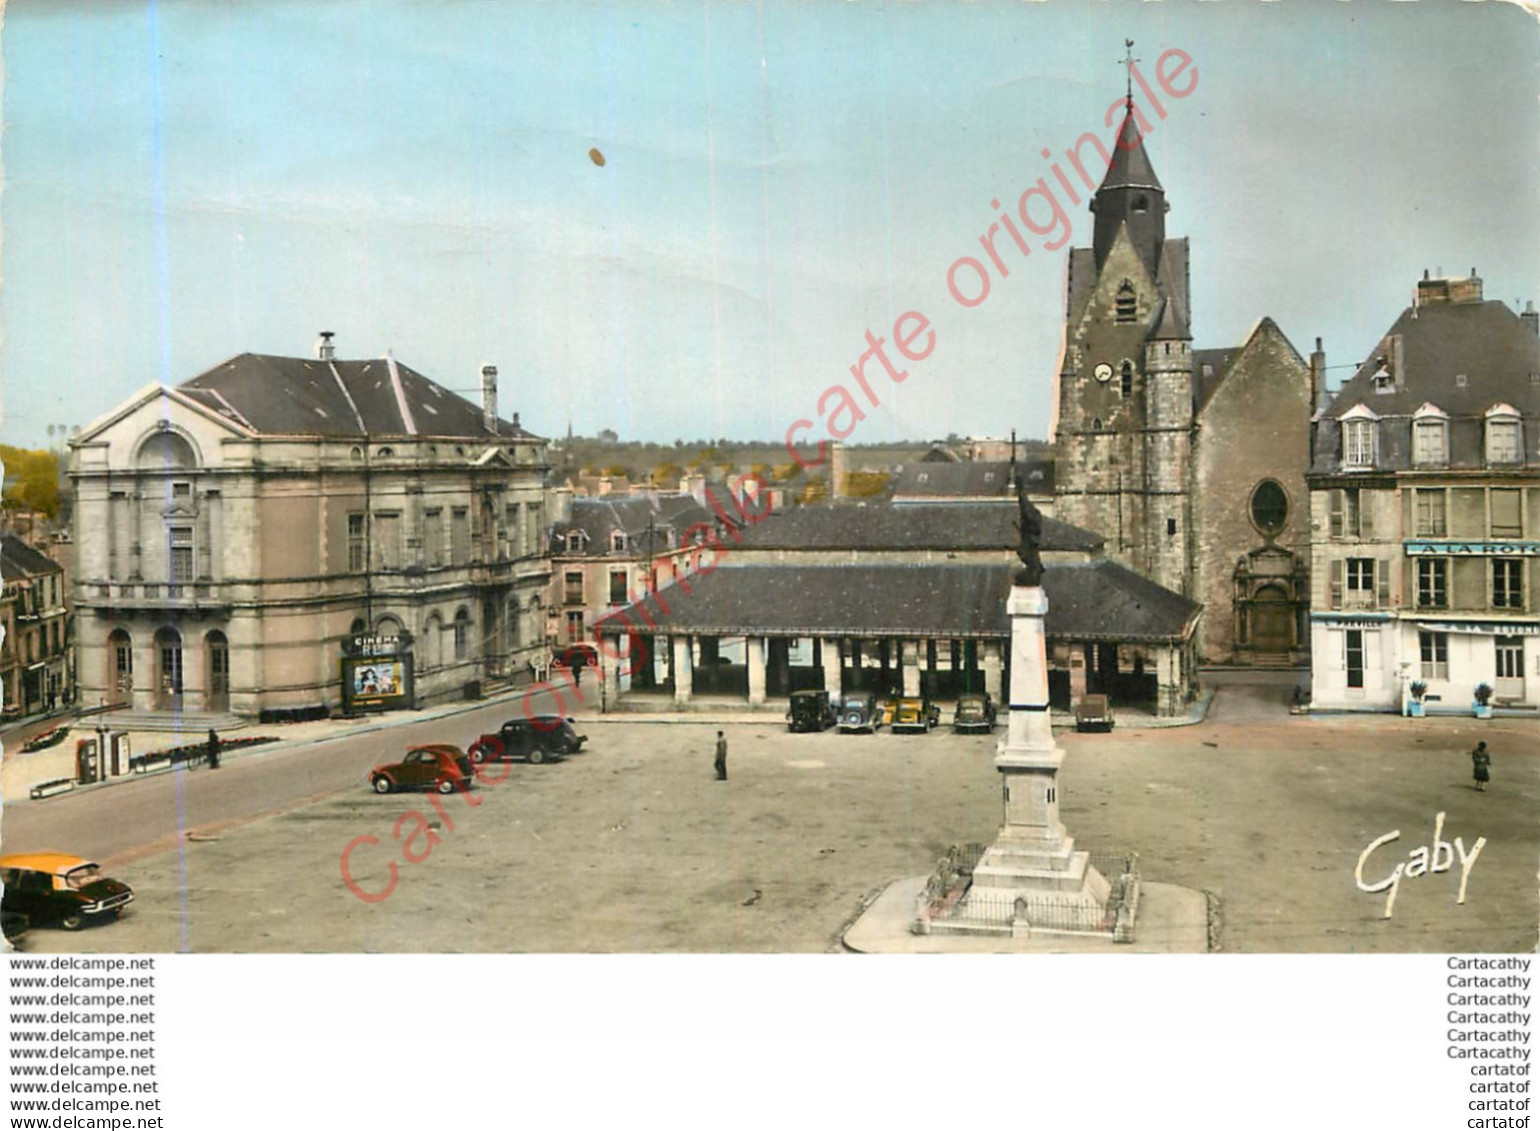 72.  MAMERS .  Place Carnot . - Mamers